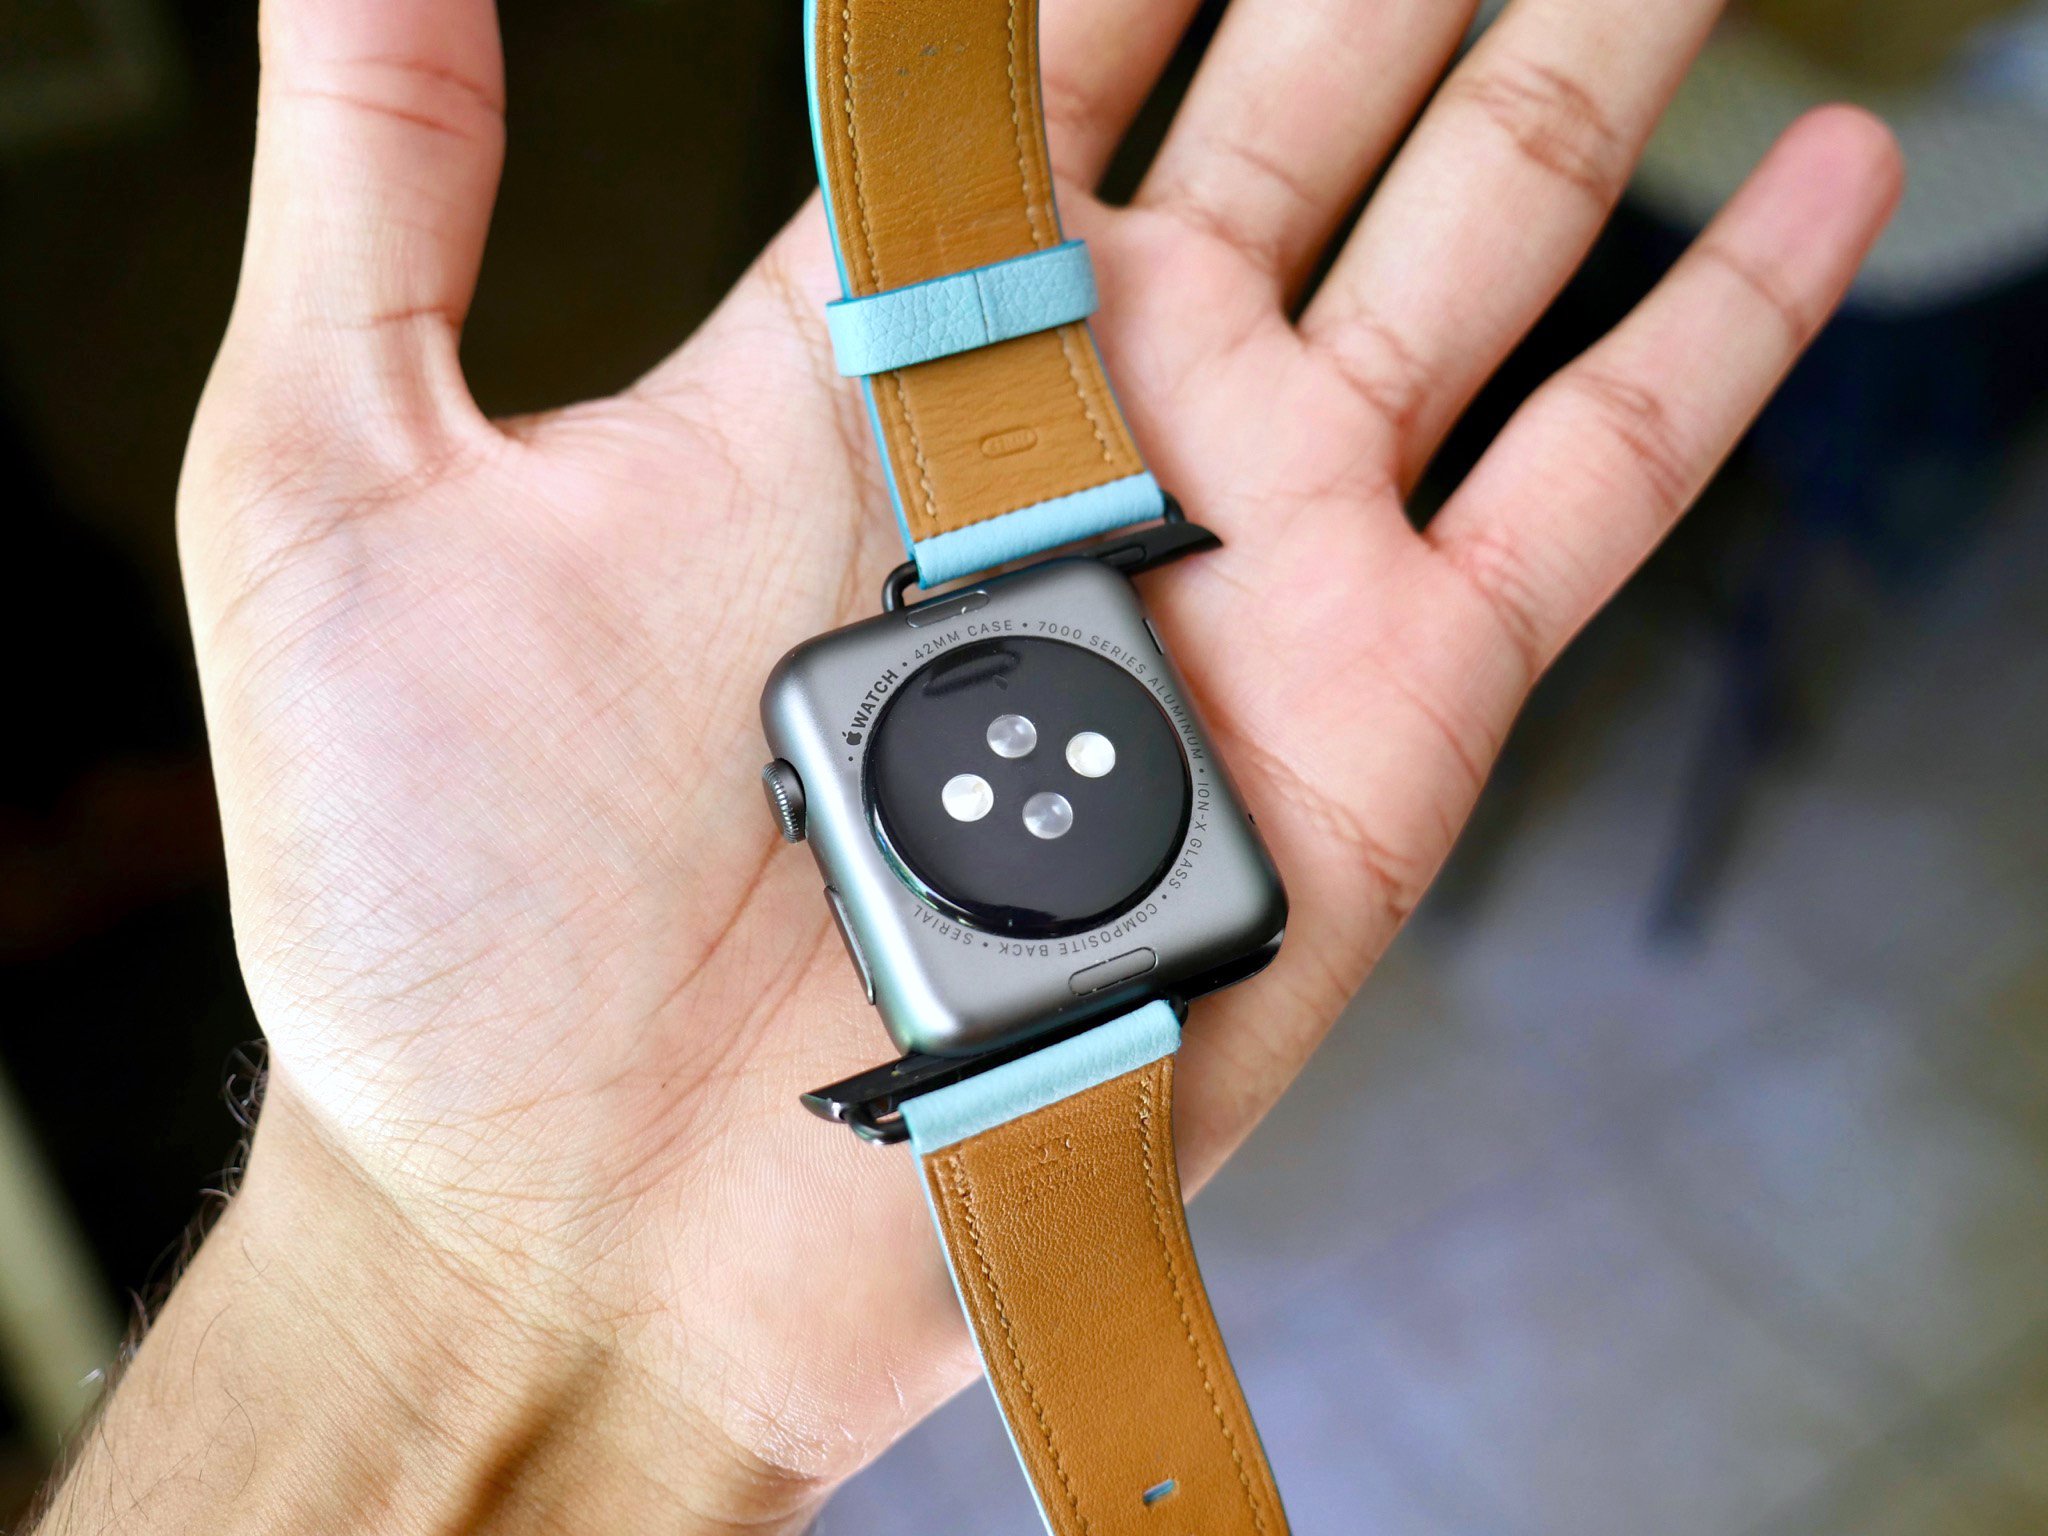 Kontrovers Sæt ud Bare gør How to swap out your Apple Watch band | iMore